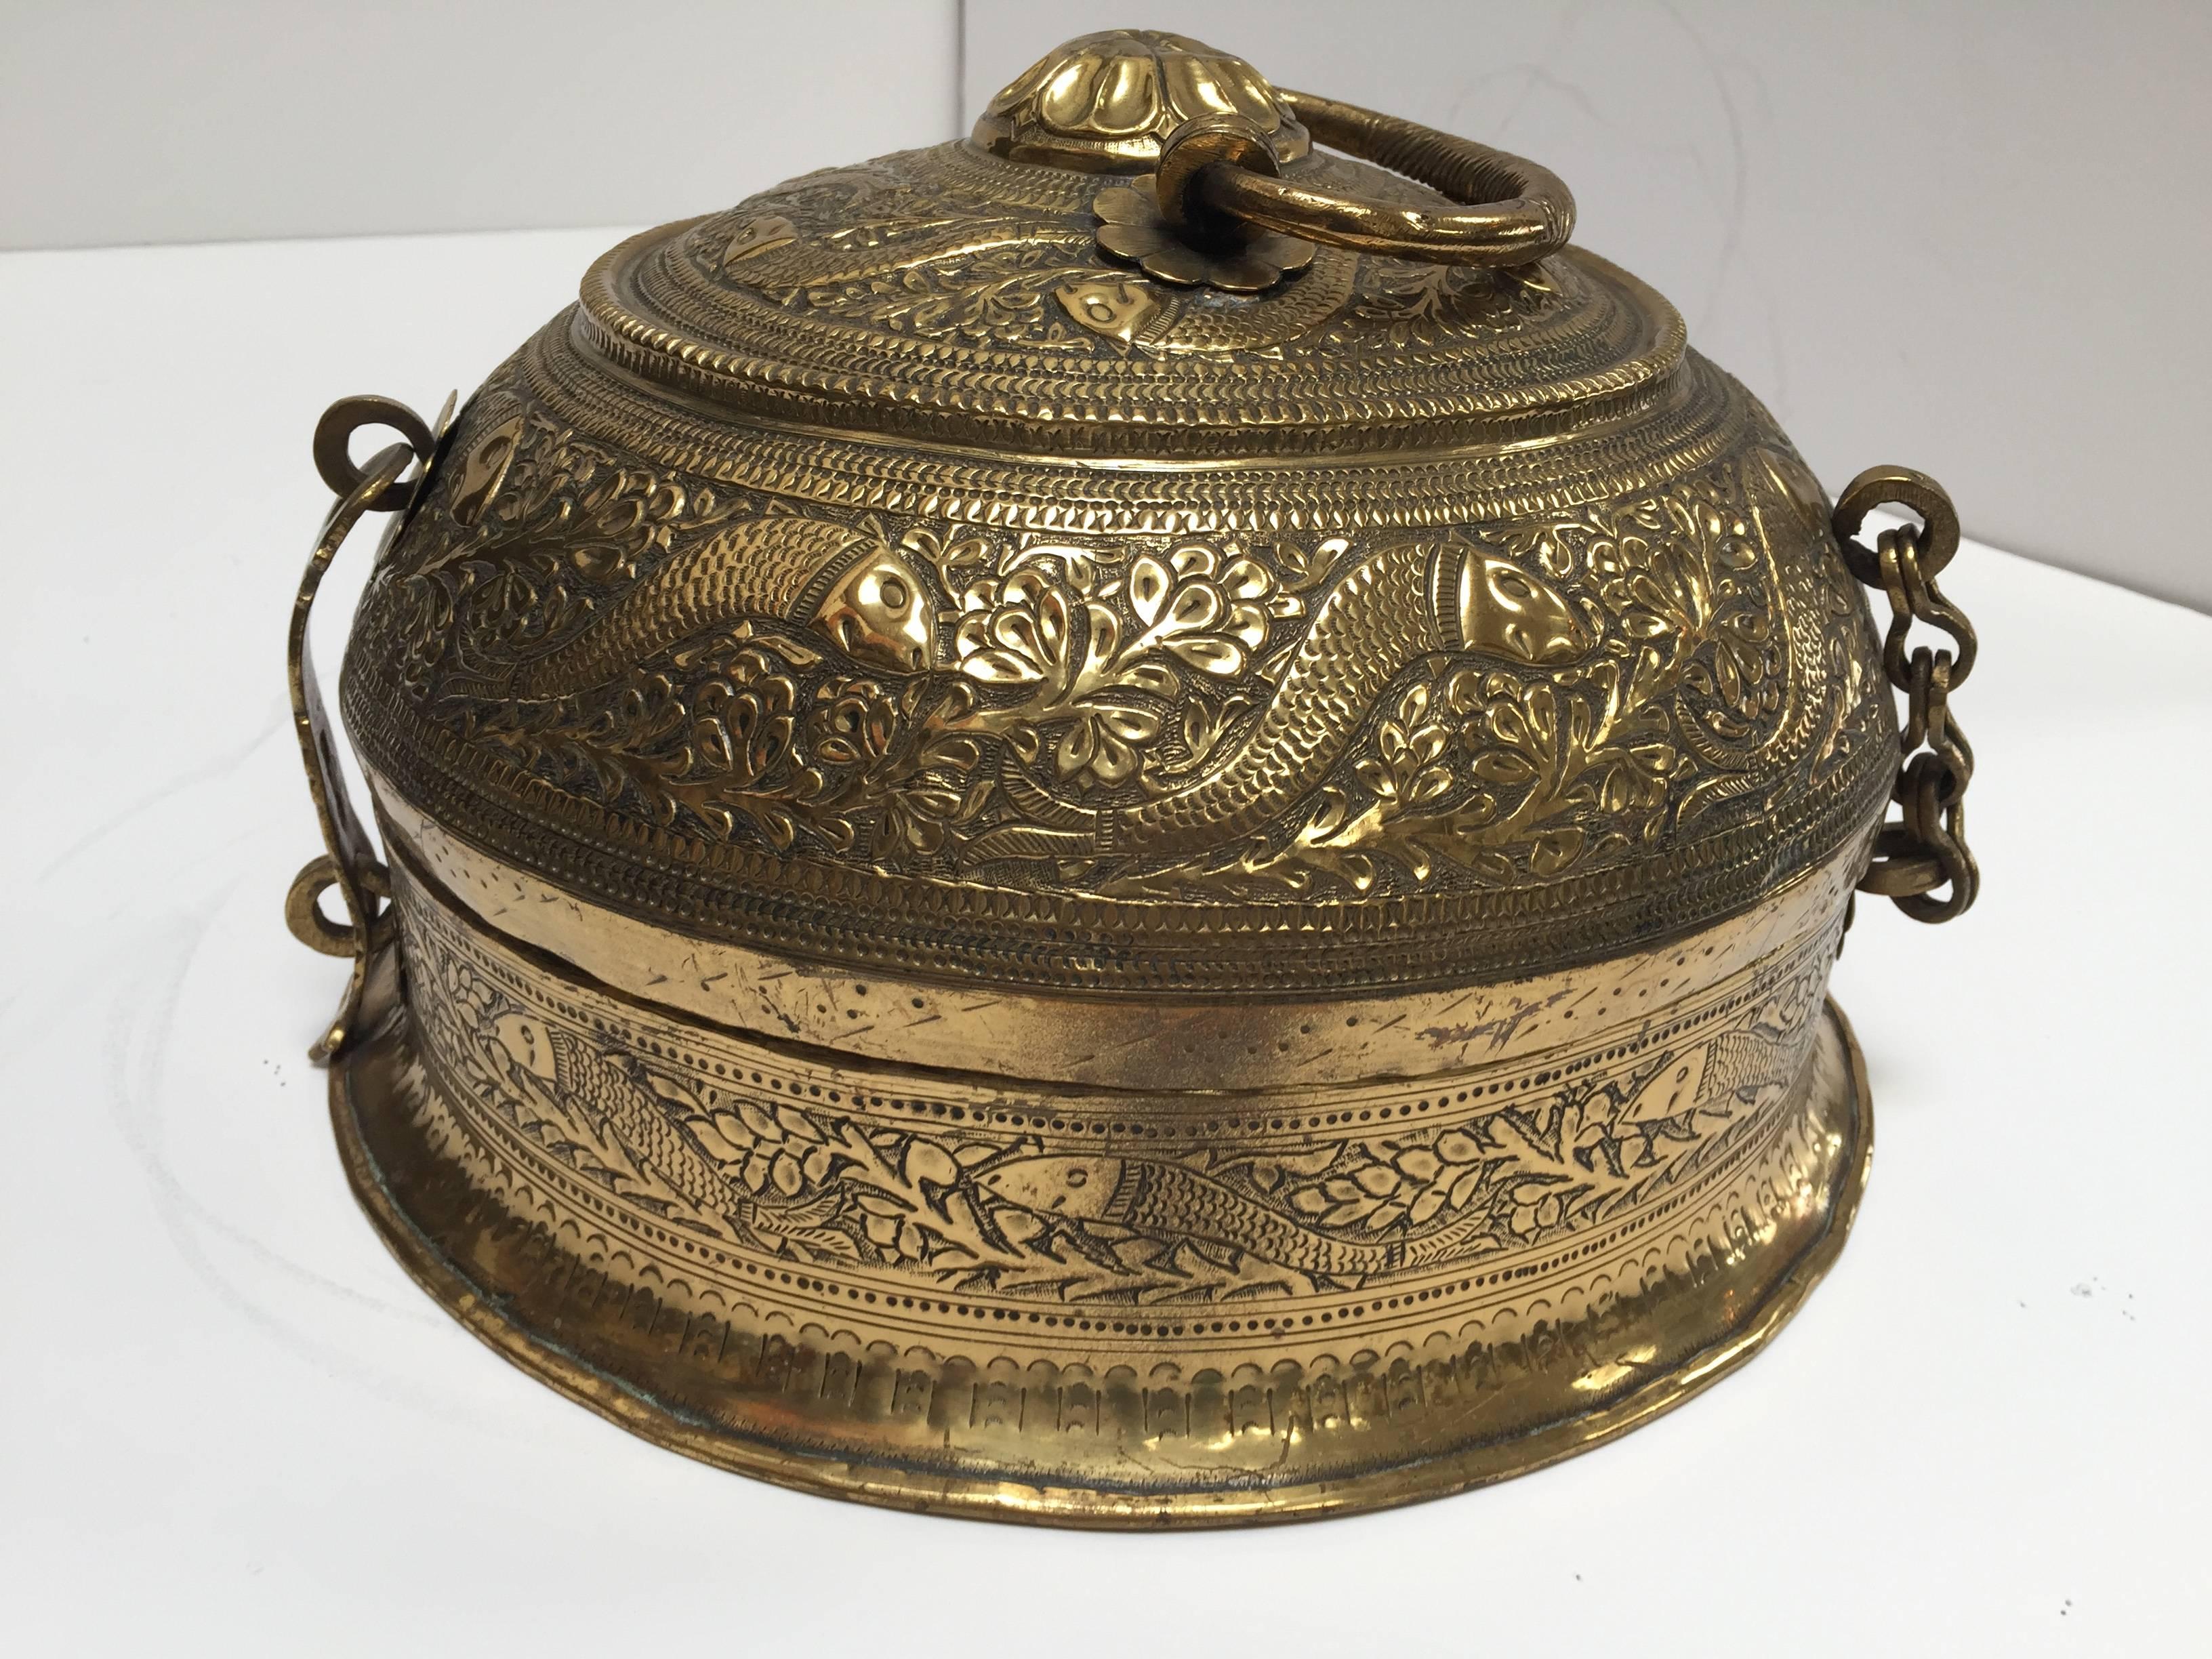 Decorative Large Round Brass Box Caddy 19th C, North India In Good Condition For Sale In North Hollywood, CA